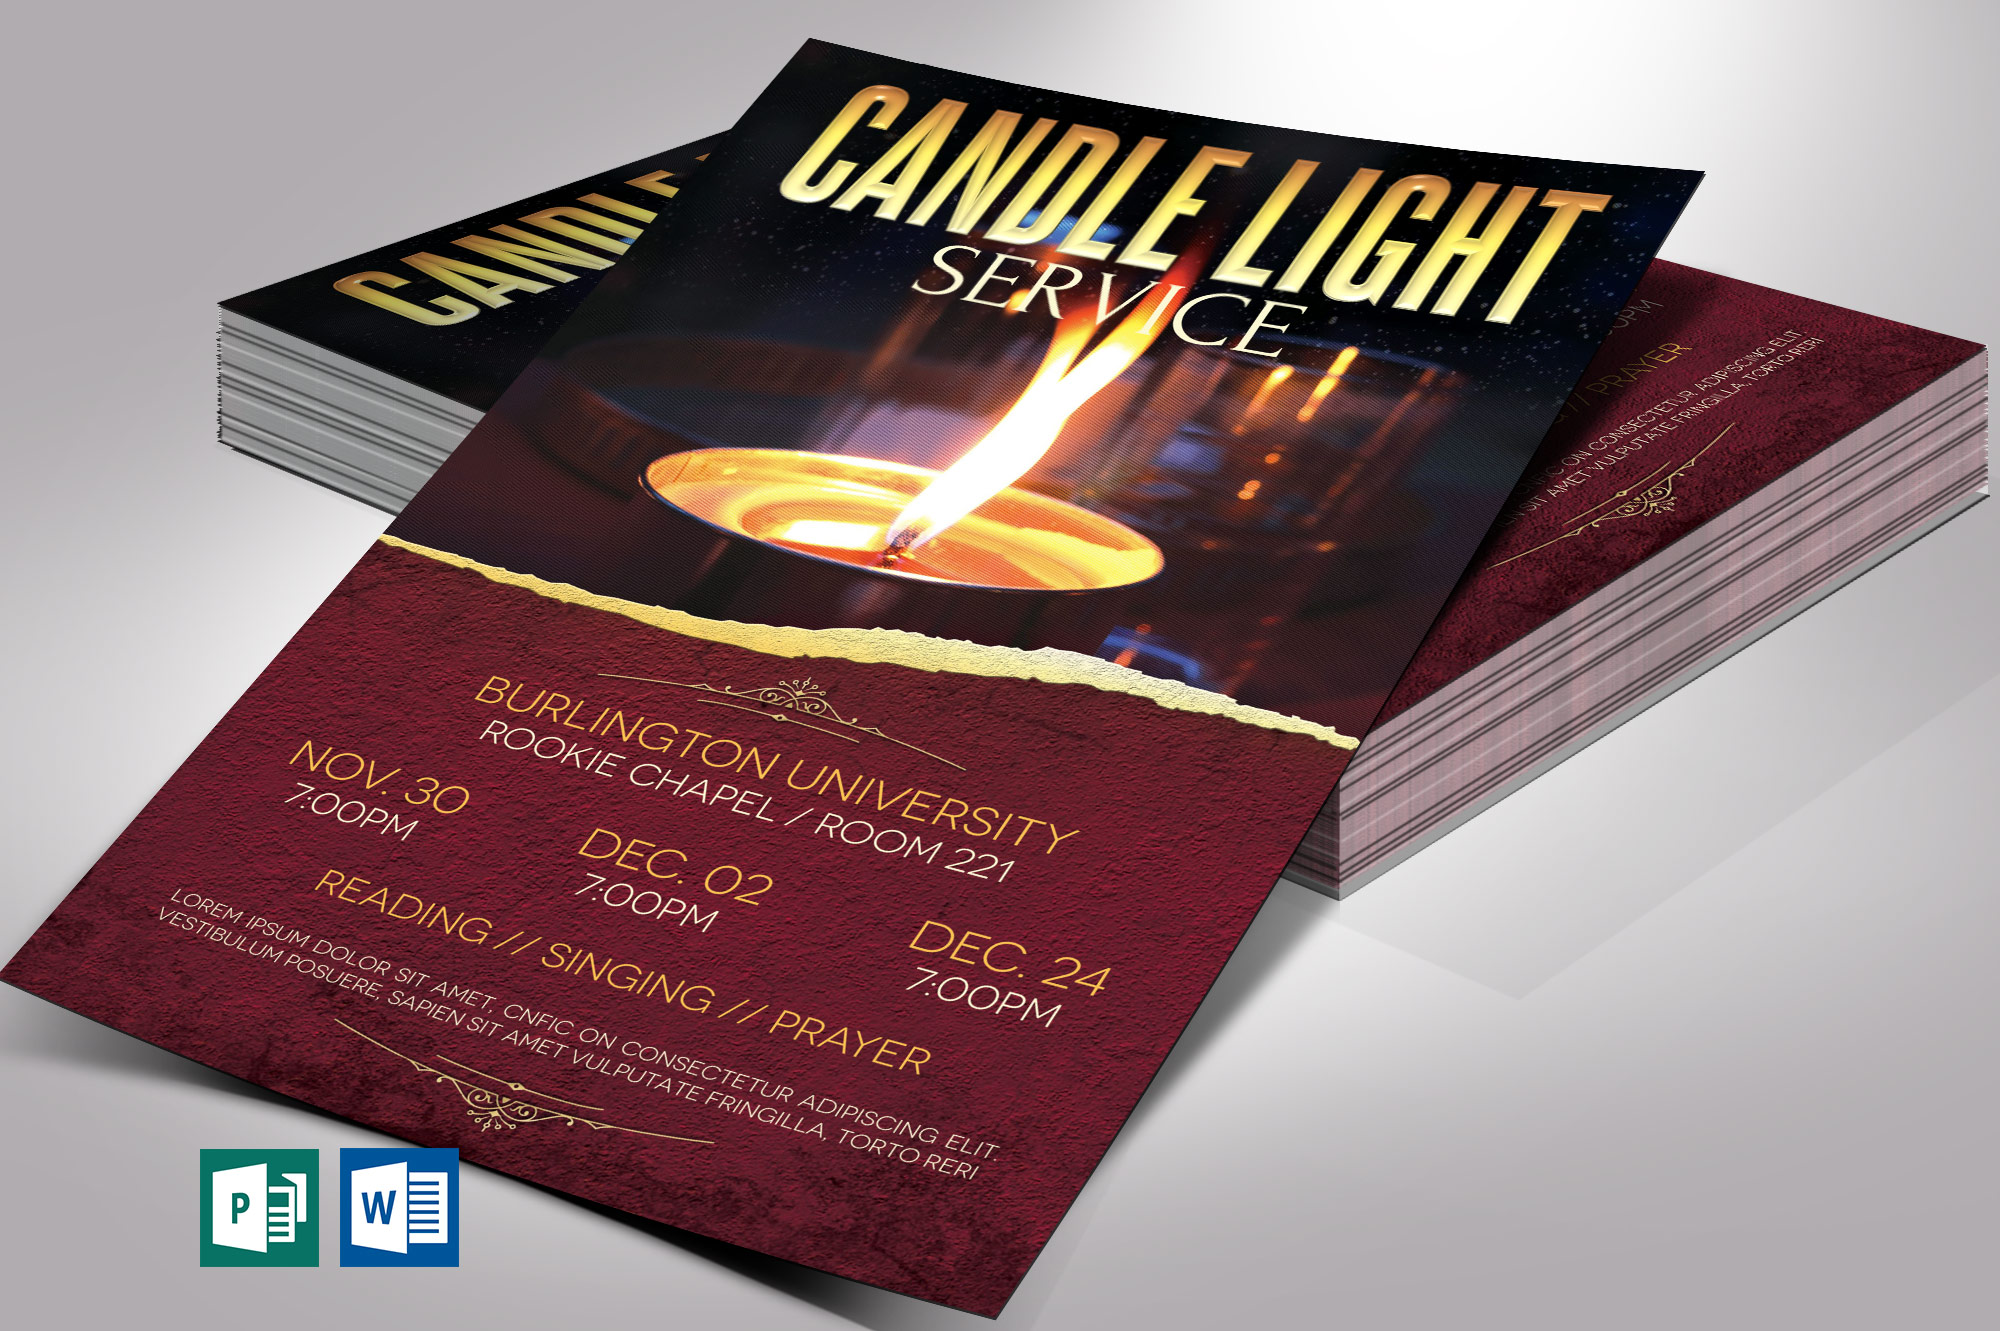 Candle Light Flyer Word Publisher Template